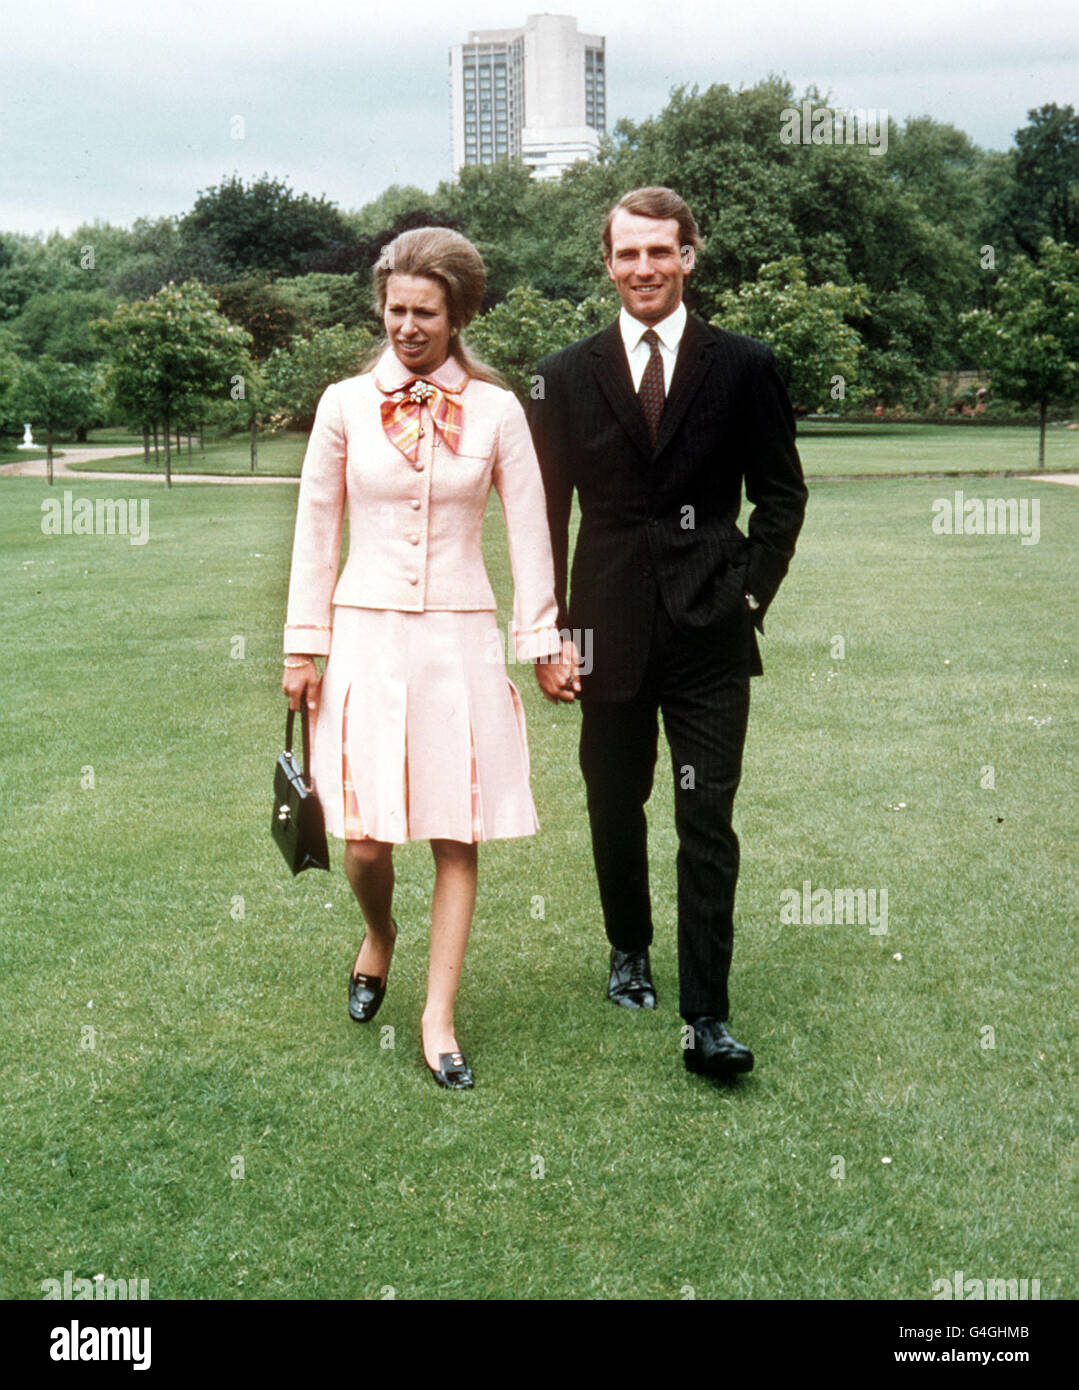 princess-anne-and-mark-phillips-engagement-G4GHMB.jpg